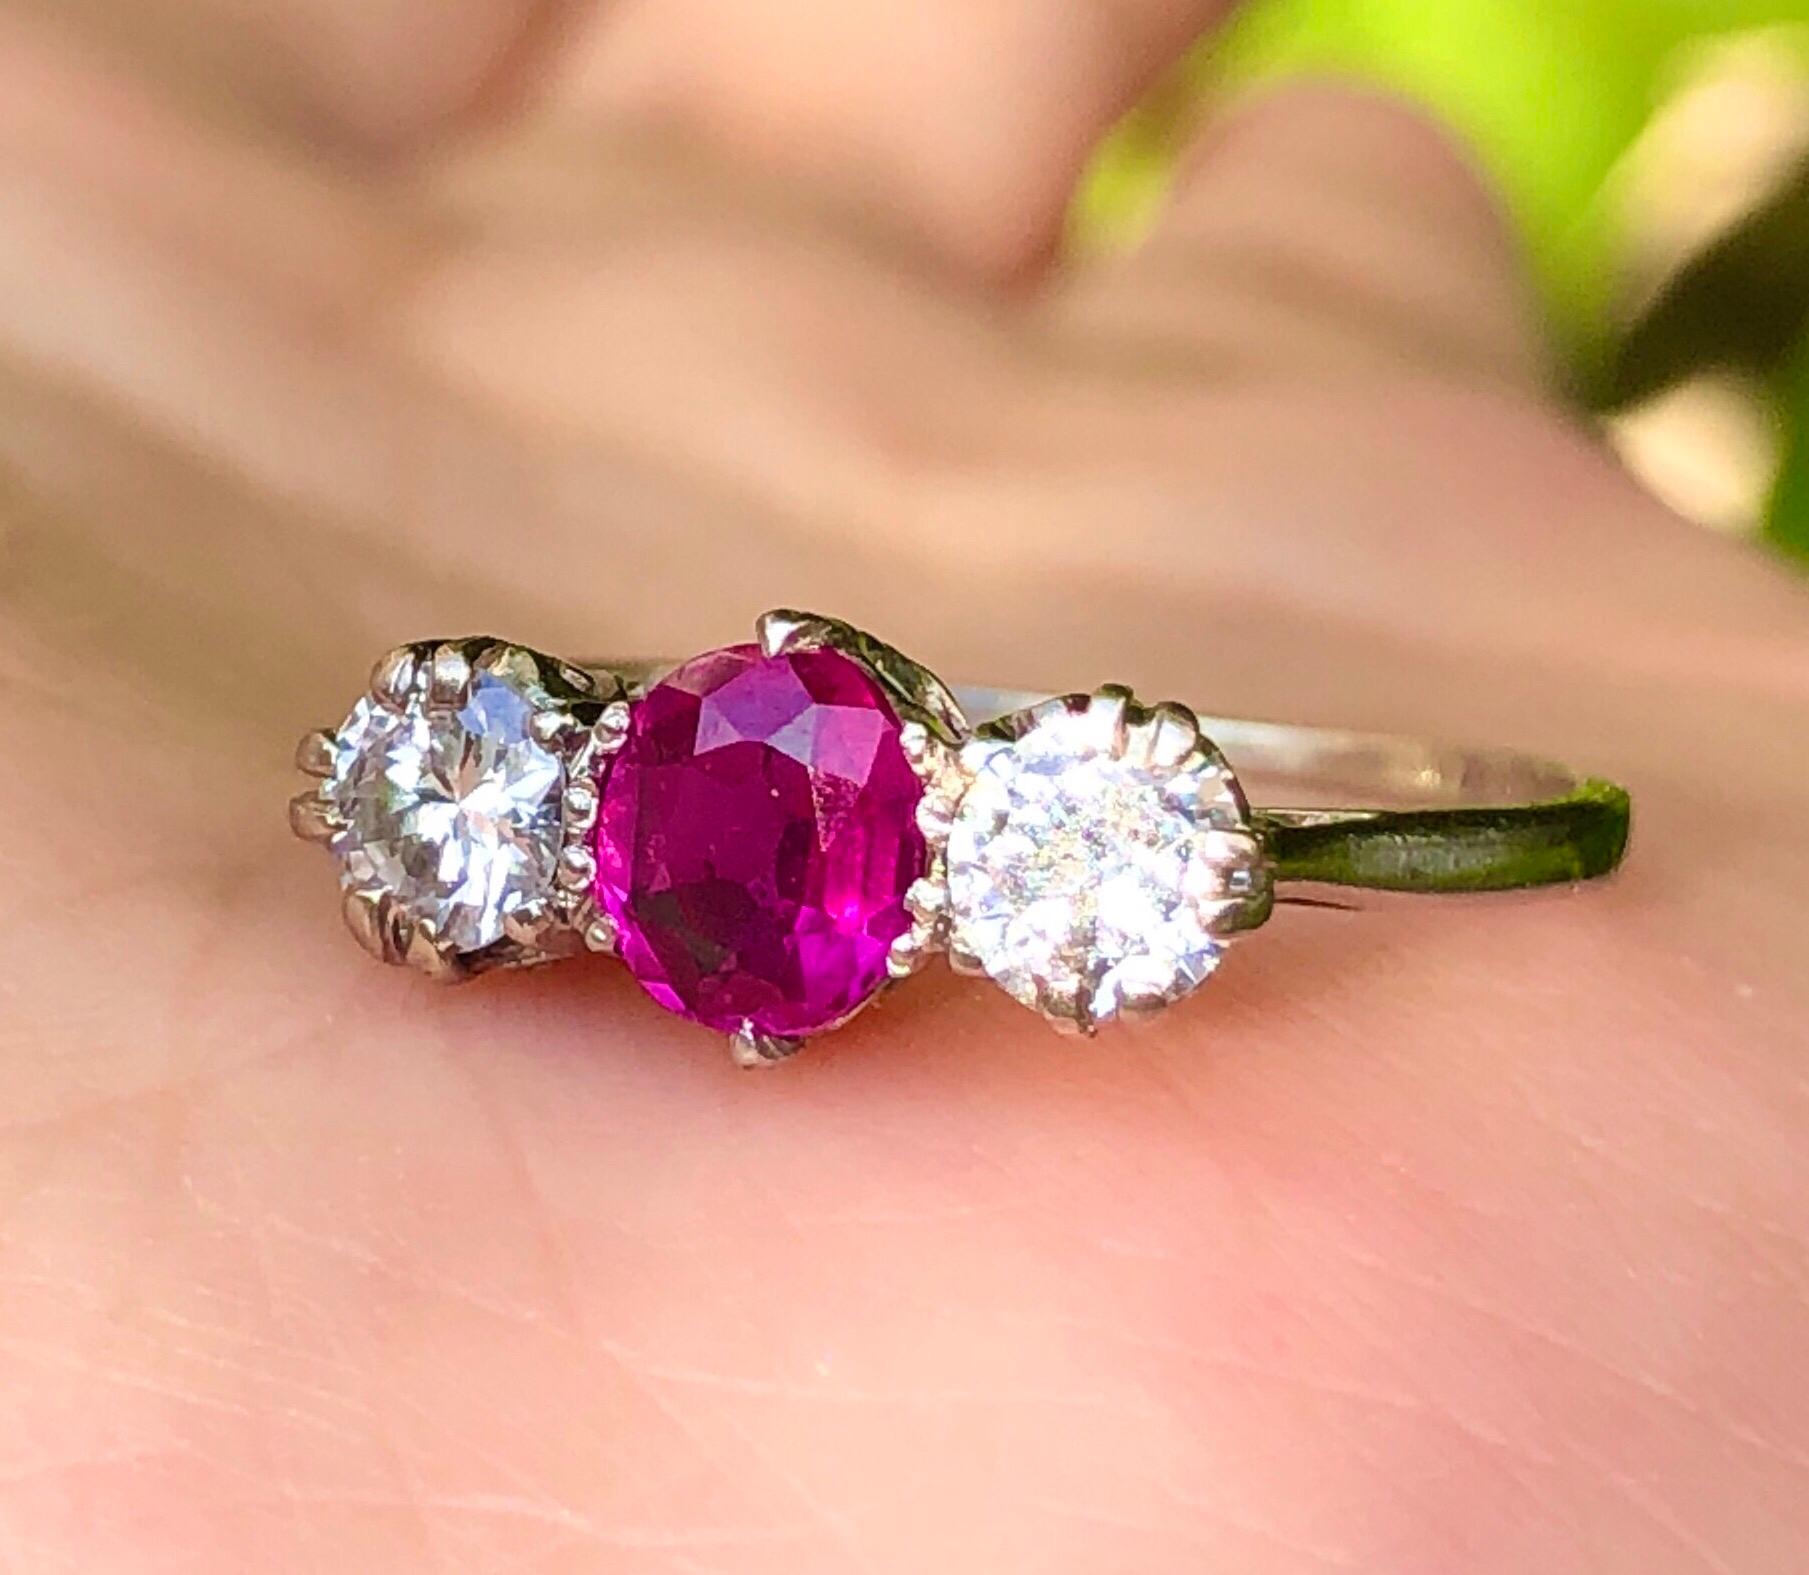 A really beautiful Platinum ring that was made circa 1900-1910. The ruby is a gorgeous pinkish 0.5 carat stone and is flanked on either side by clear white diamonds weighing half a carat each. It would be an ideal engagement or Ruby anniversary